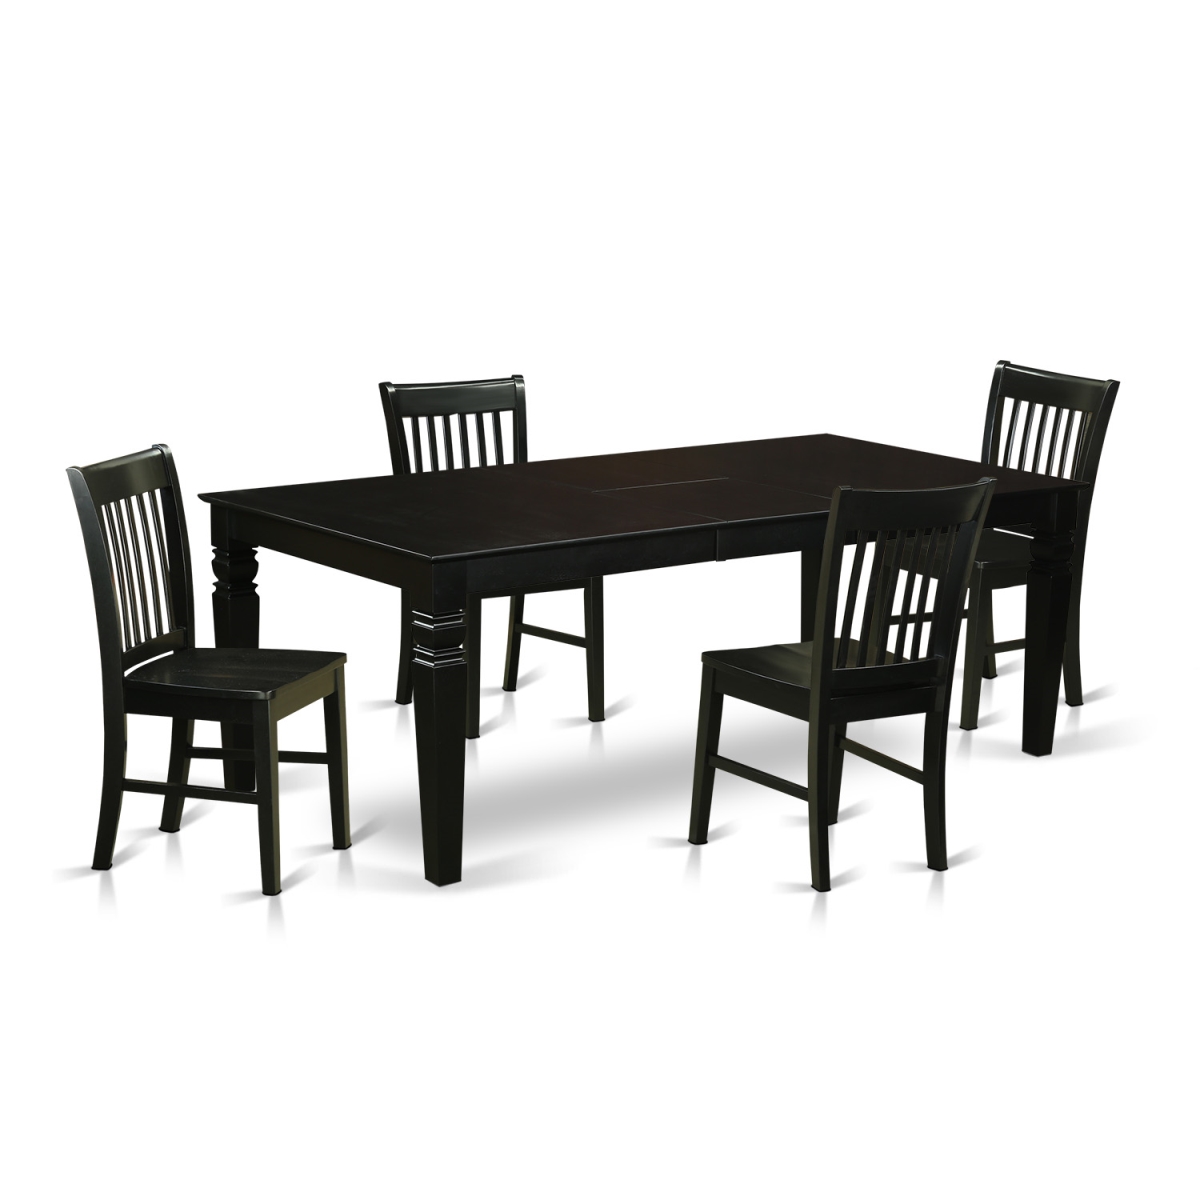 Dinette Set With A Single Logan Table & 4 Solid Wood Seat Chairs, Distinctive Black - 5 Piece